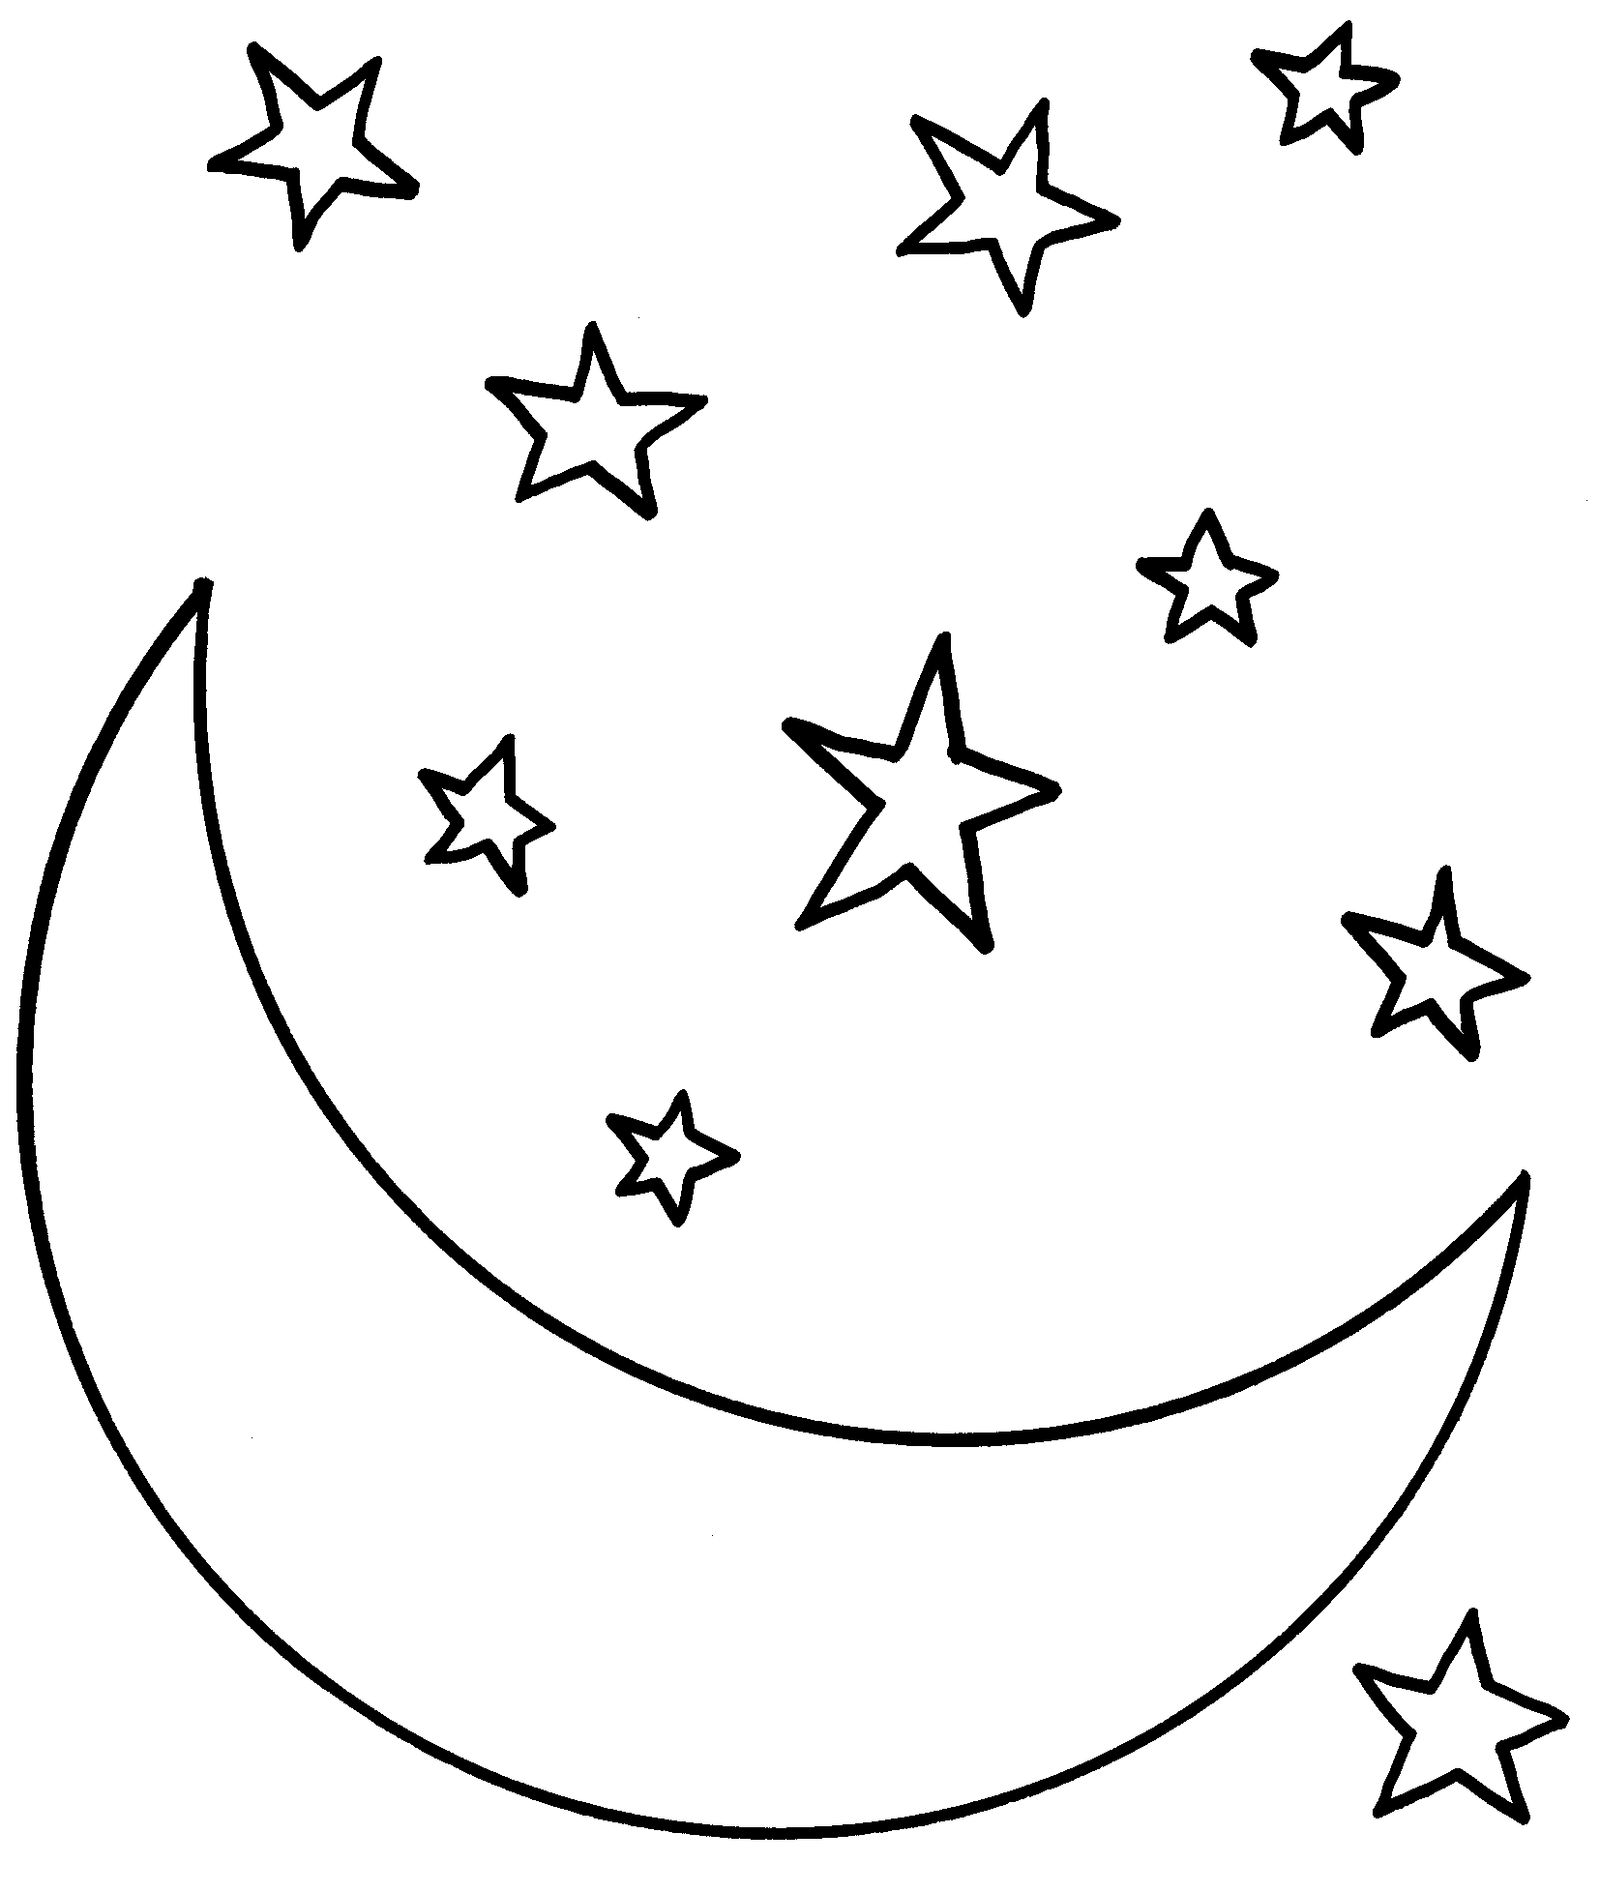 Moon coloring pages printable for free download